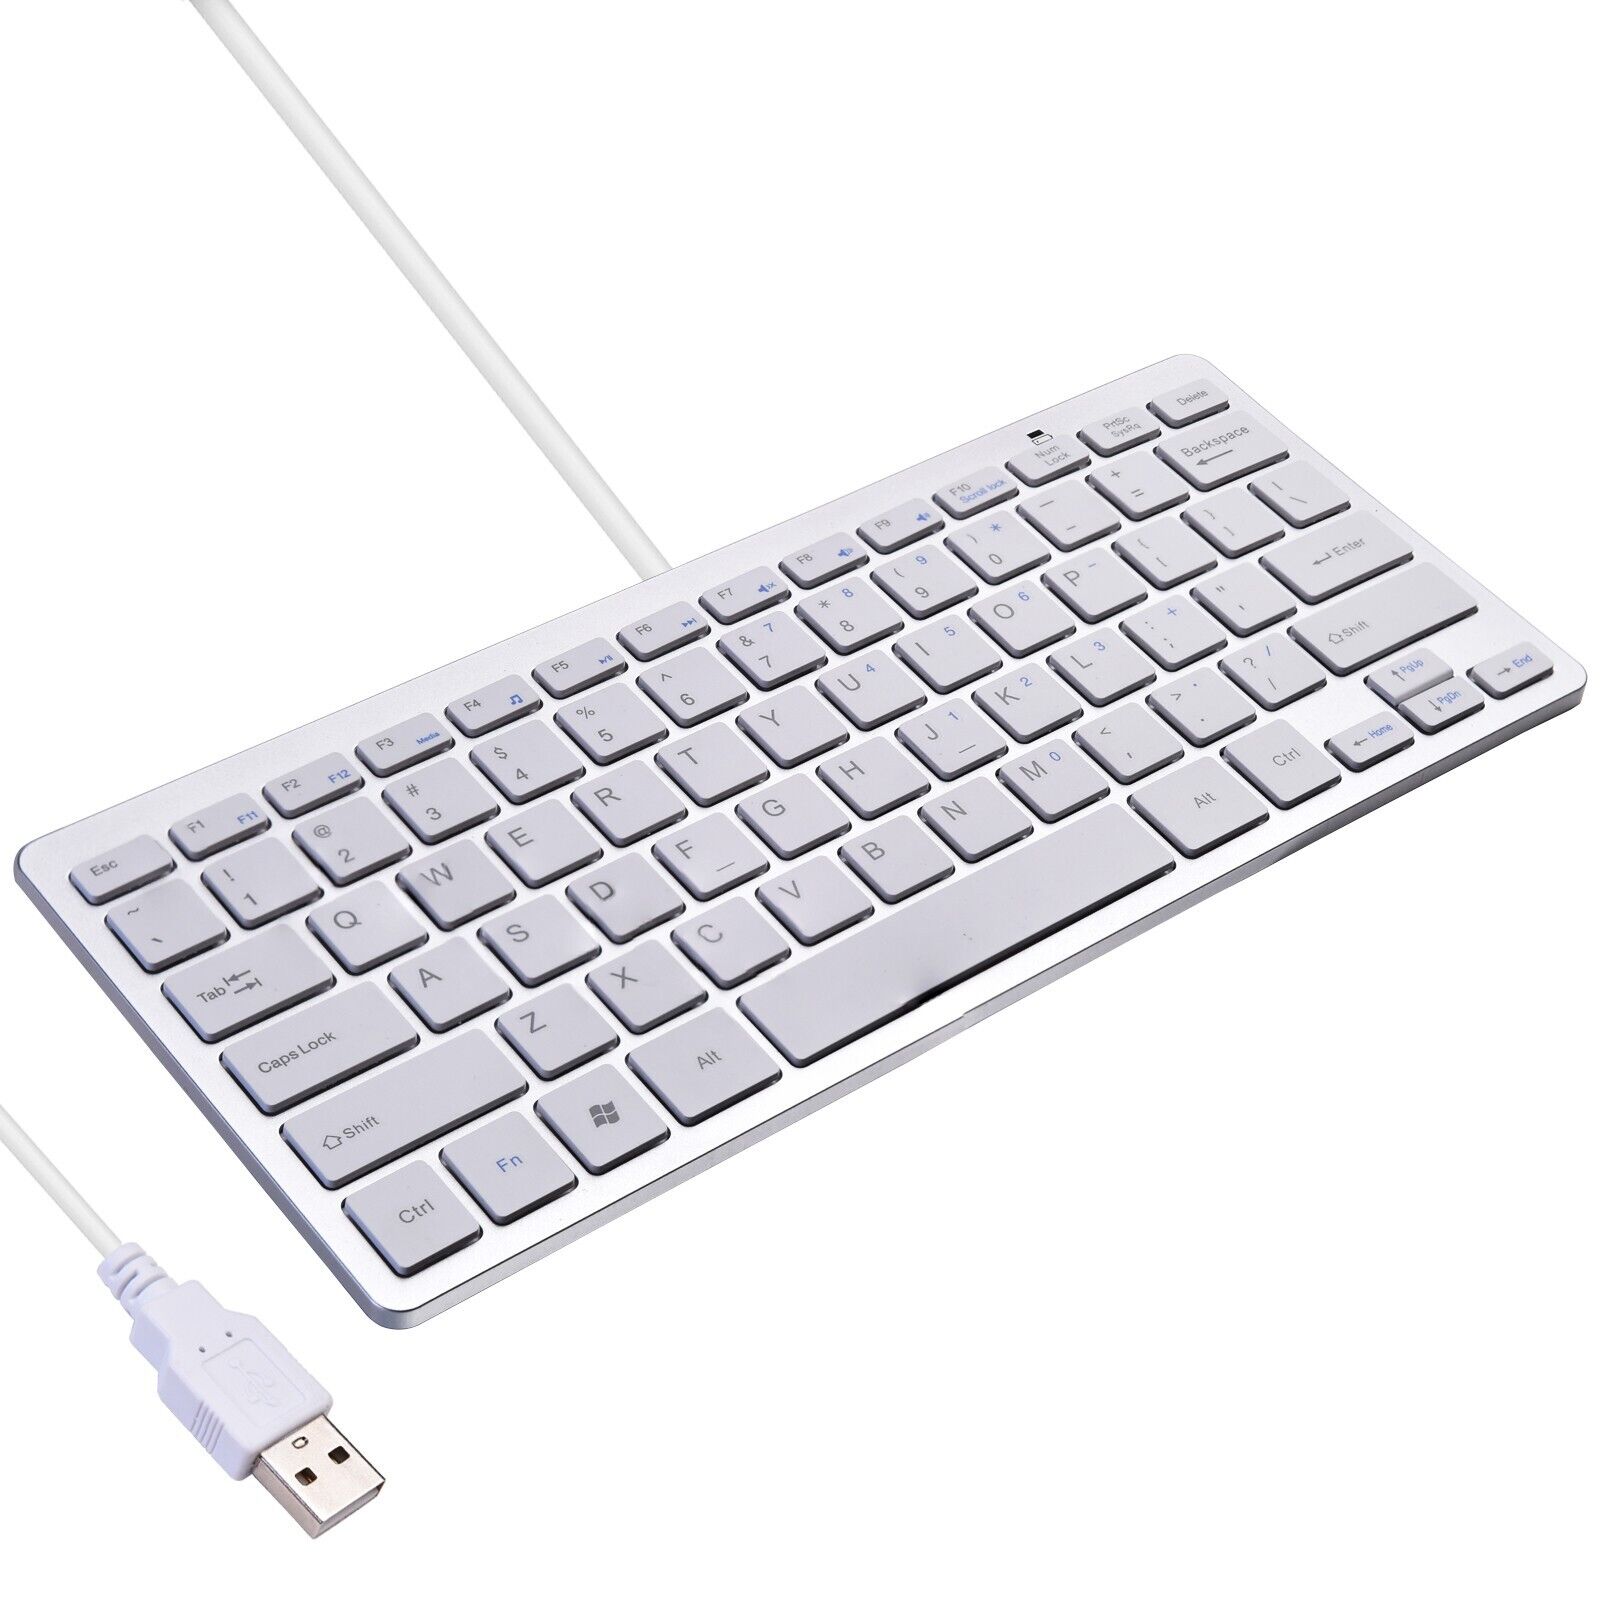 Ultra Thin Mini USB Wired Compact Keyboard for PC Mac Laptop 78 Key Silver White